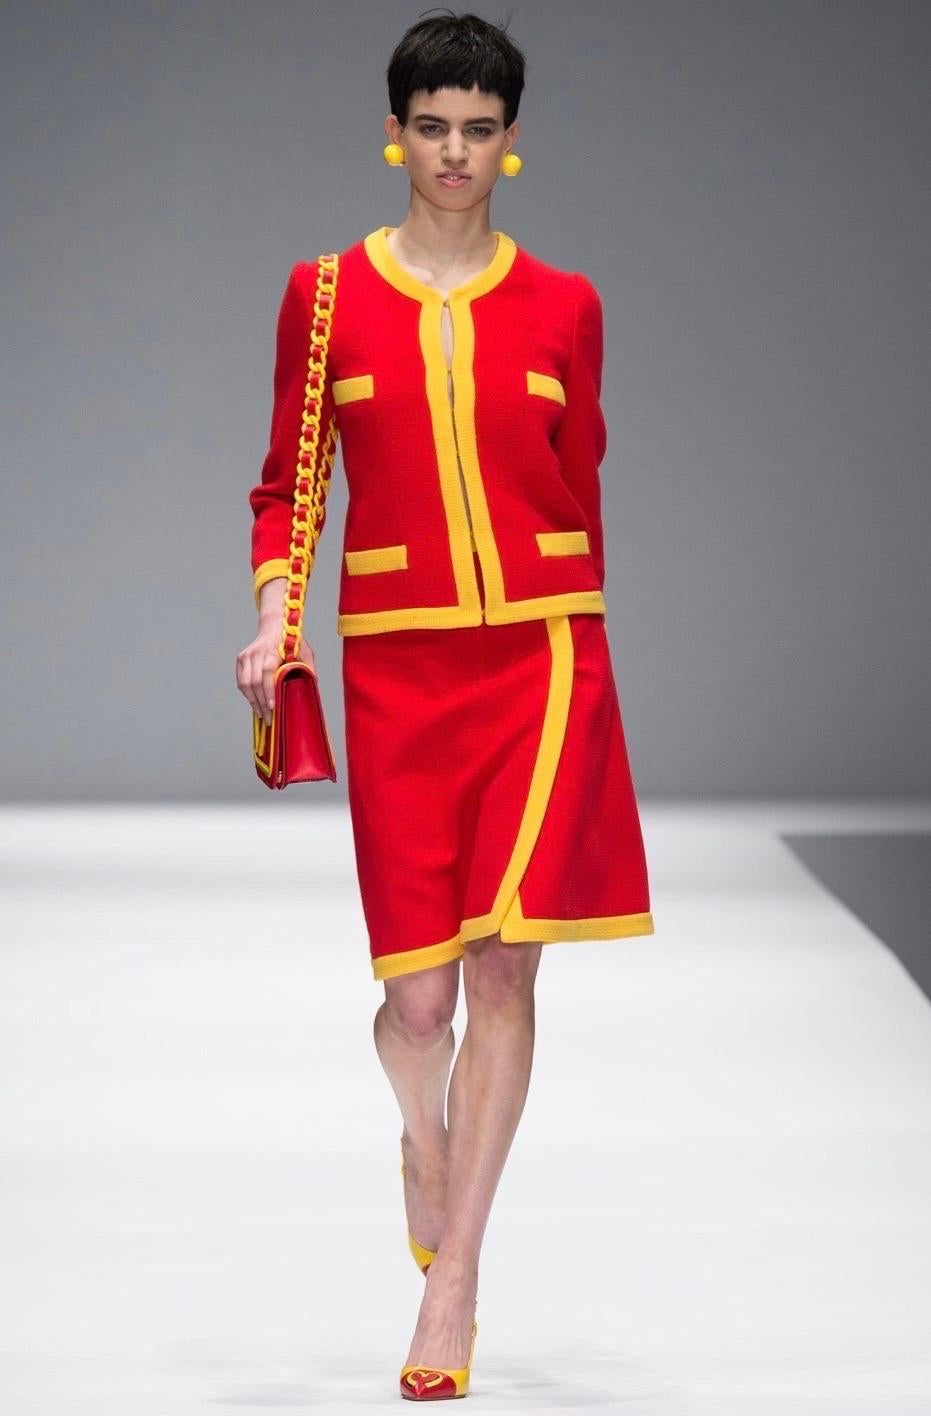 Moschino McDonalds red and yellow tweed blazer from the Fall Winter 2014 fast food collection and as seen on the runway. 
Designed by Jeremy Scott and was his first runway collection with Moschino 
Hook and eye front closure
Snap button cuff